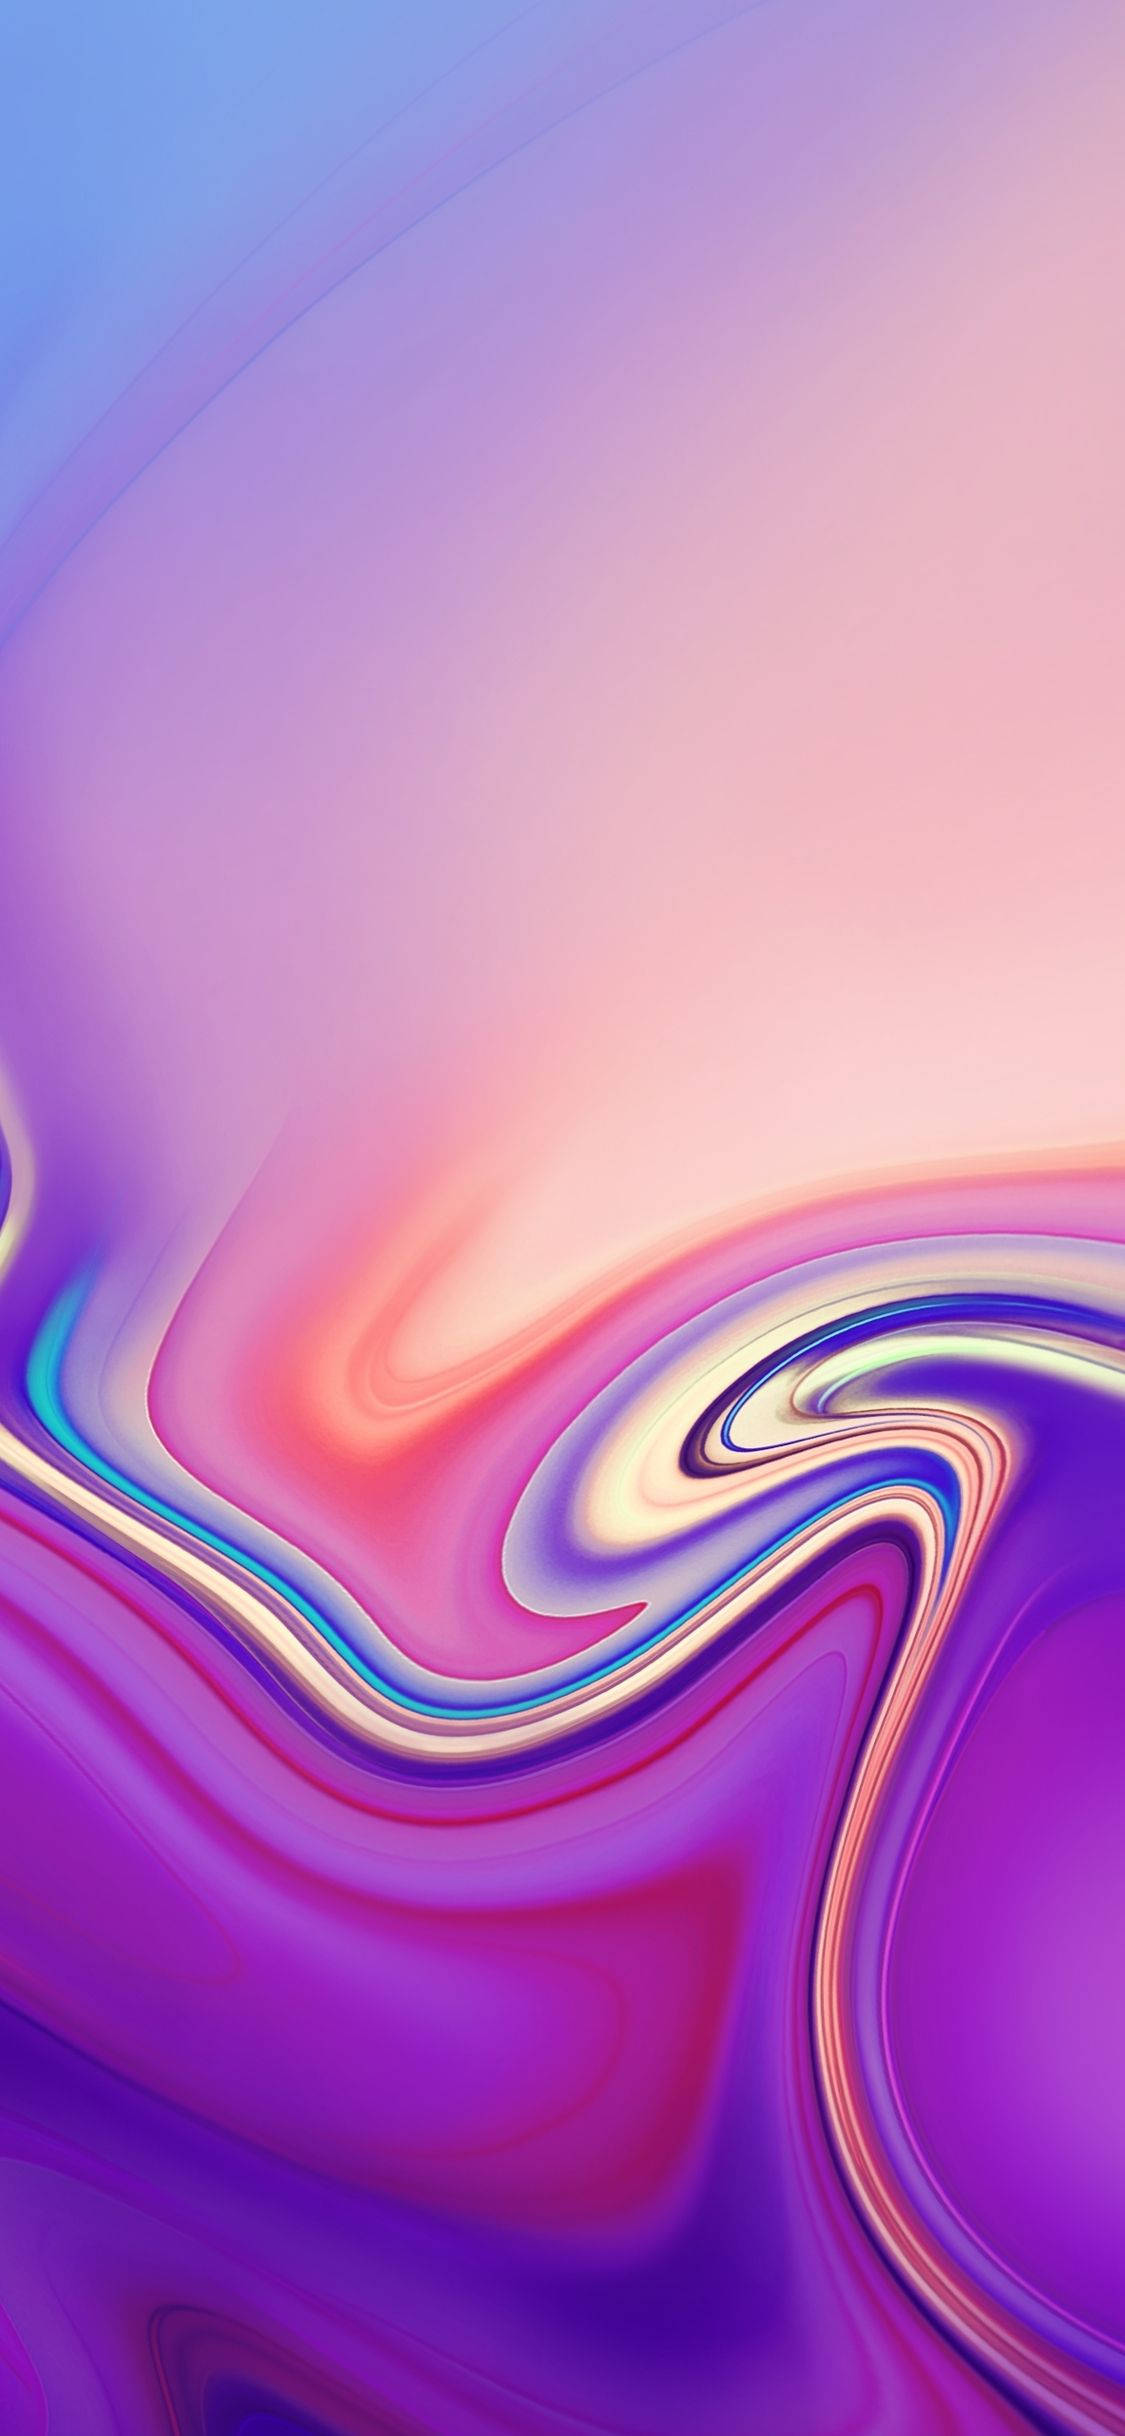 Abstract Purple Swirl Note 10 Background